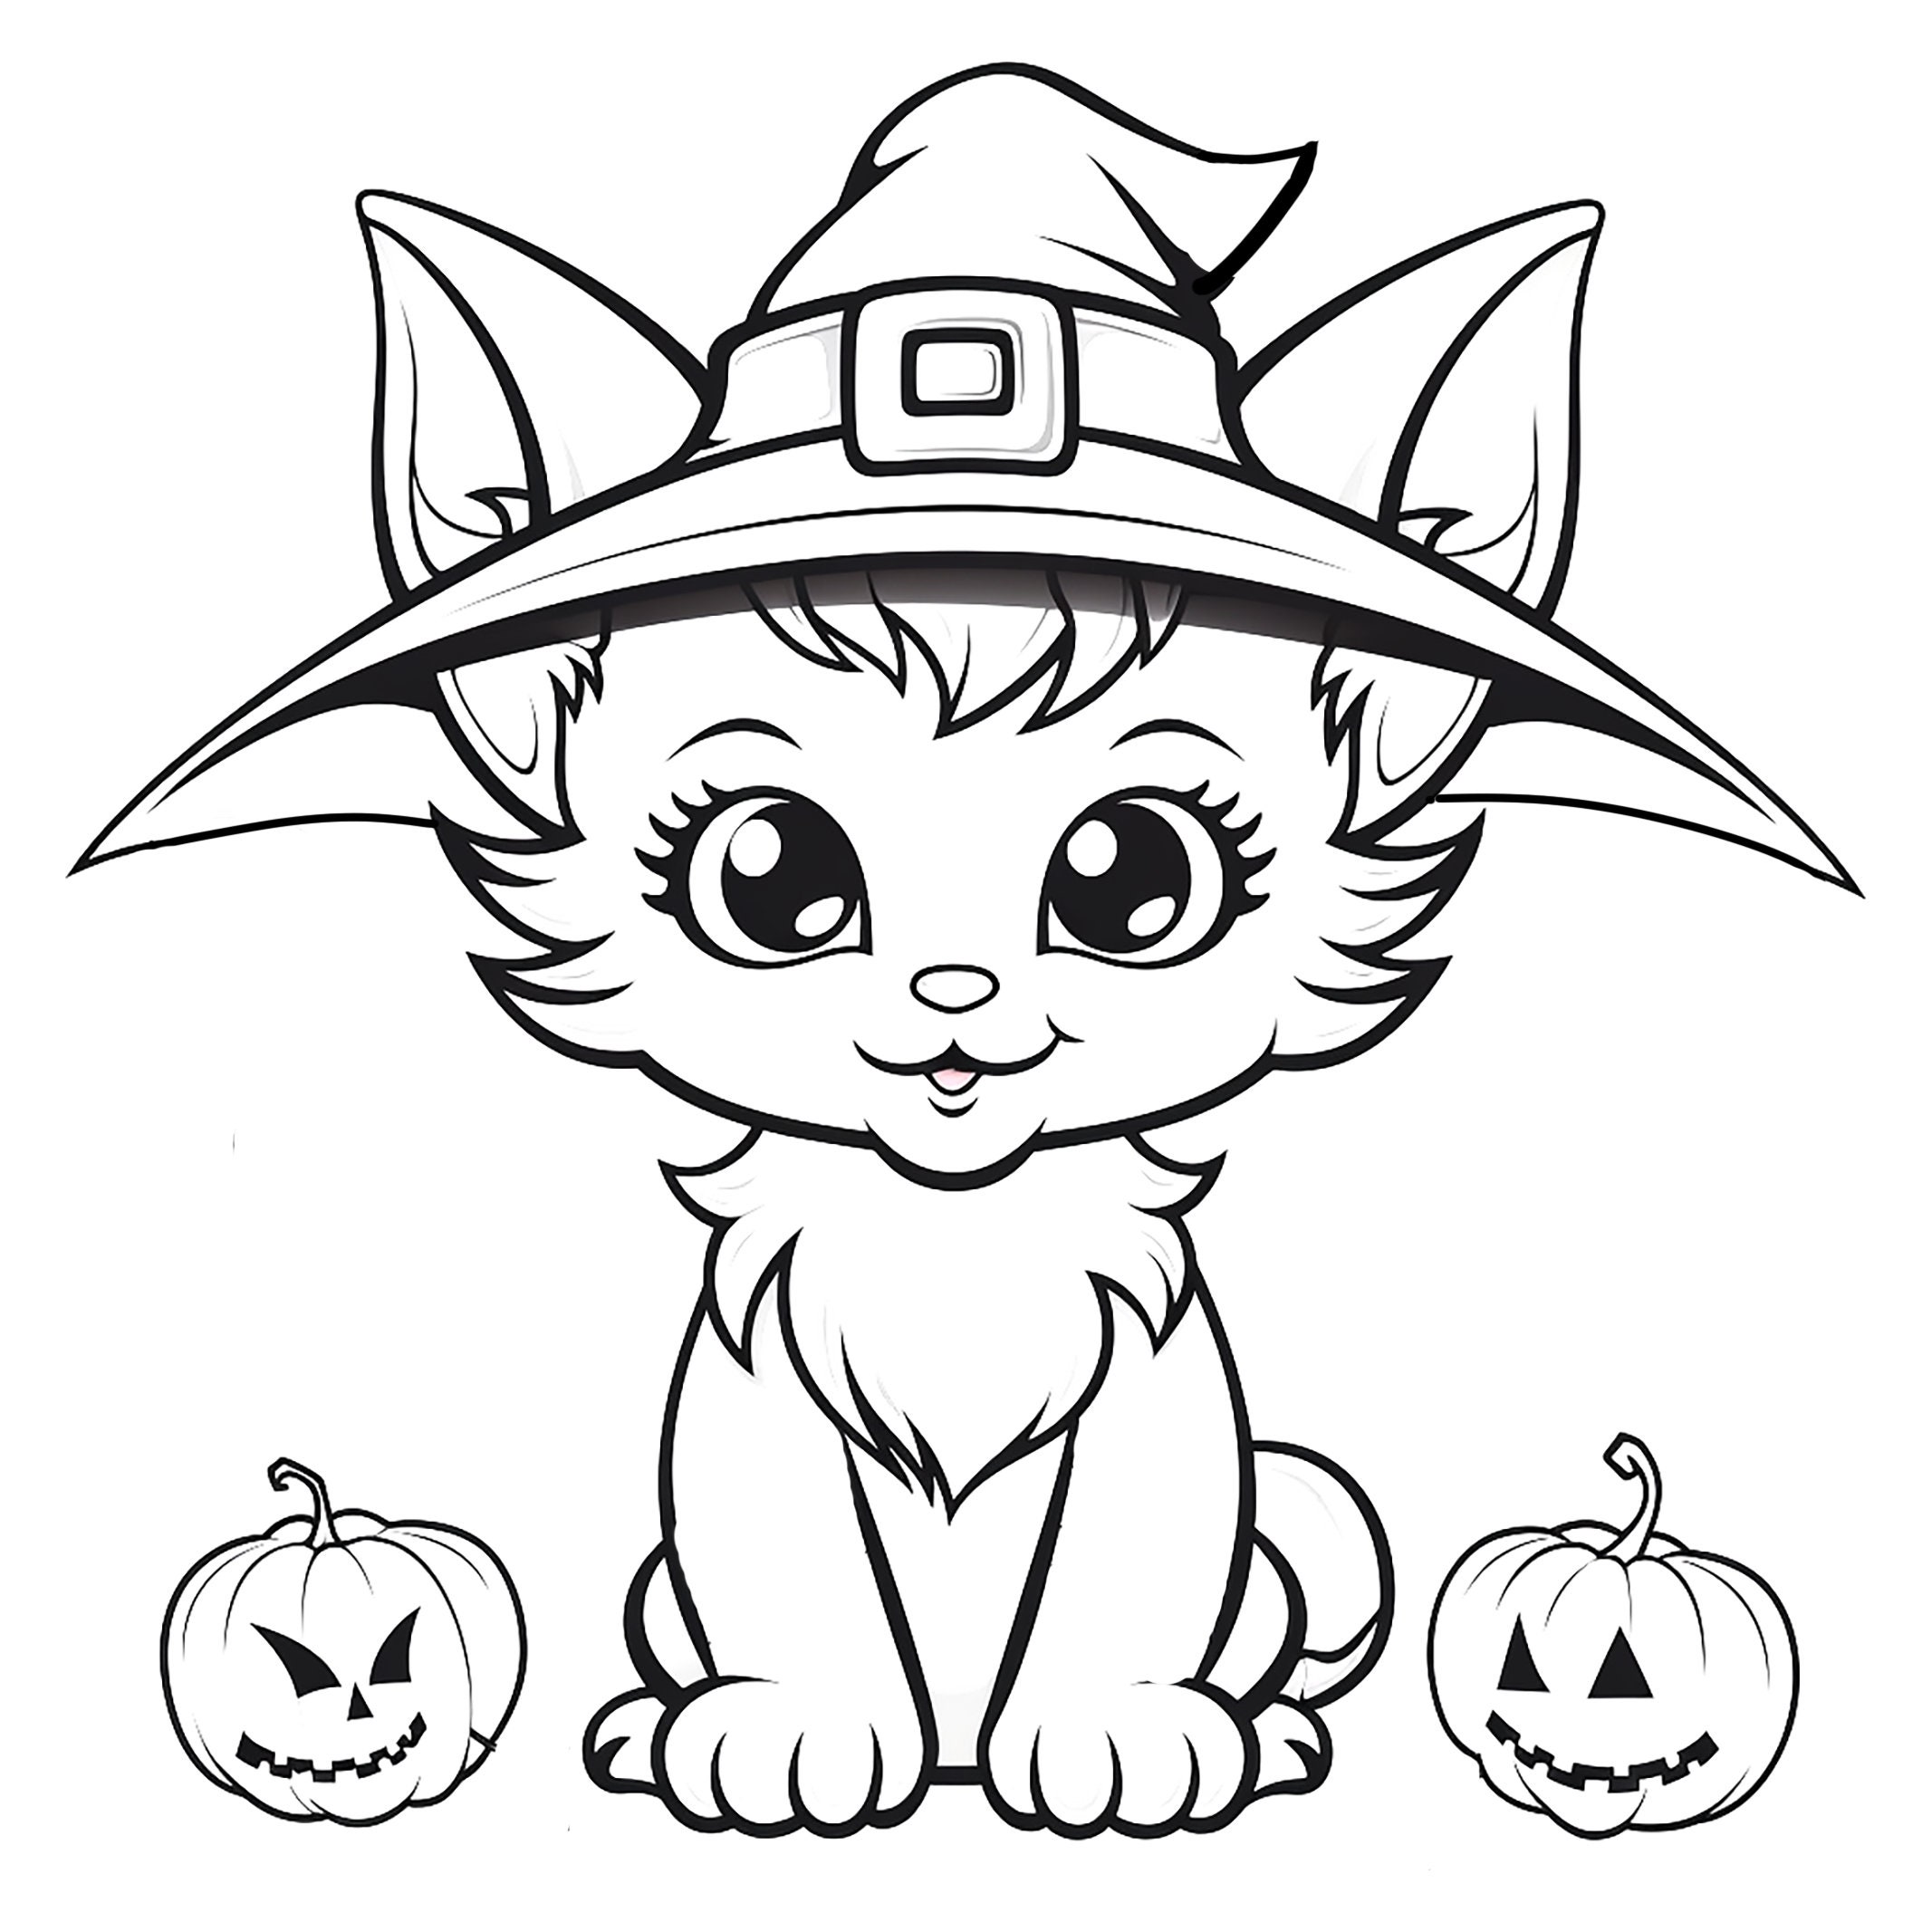 PRINTABLE Halloween Coloring Pages for Kids Digital Download - Etsy